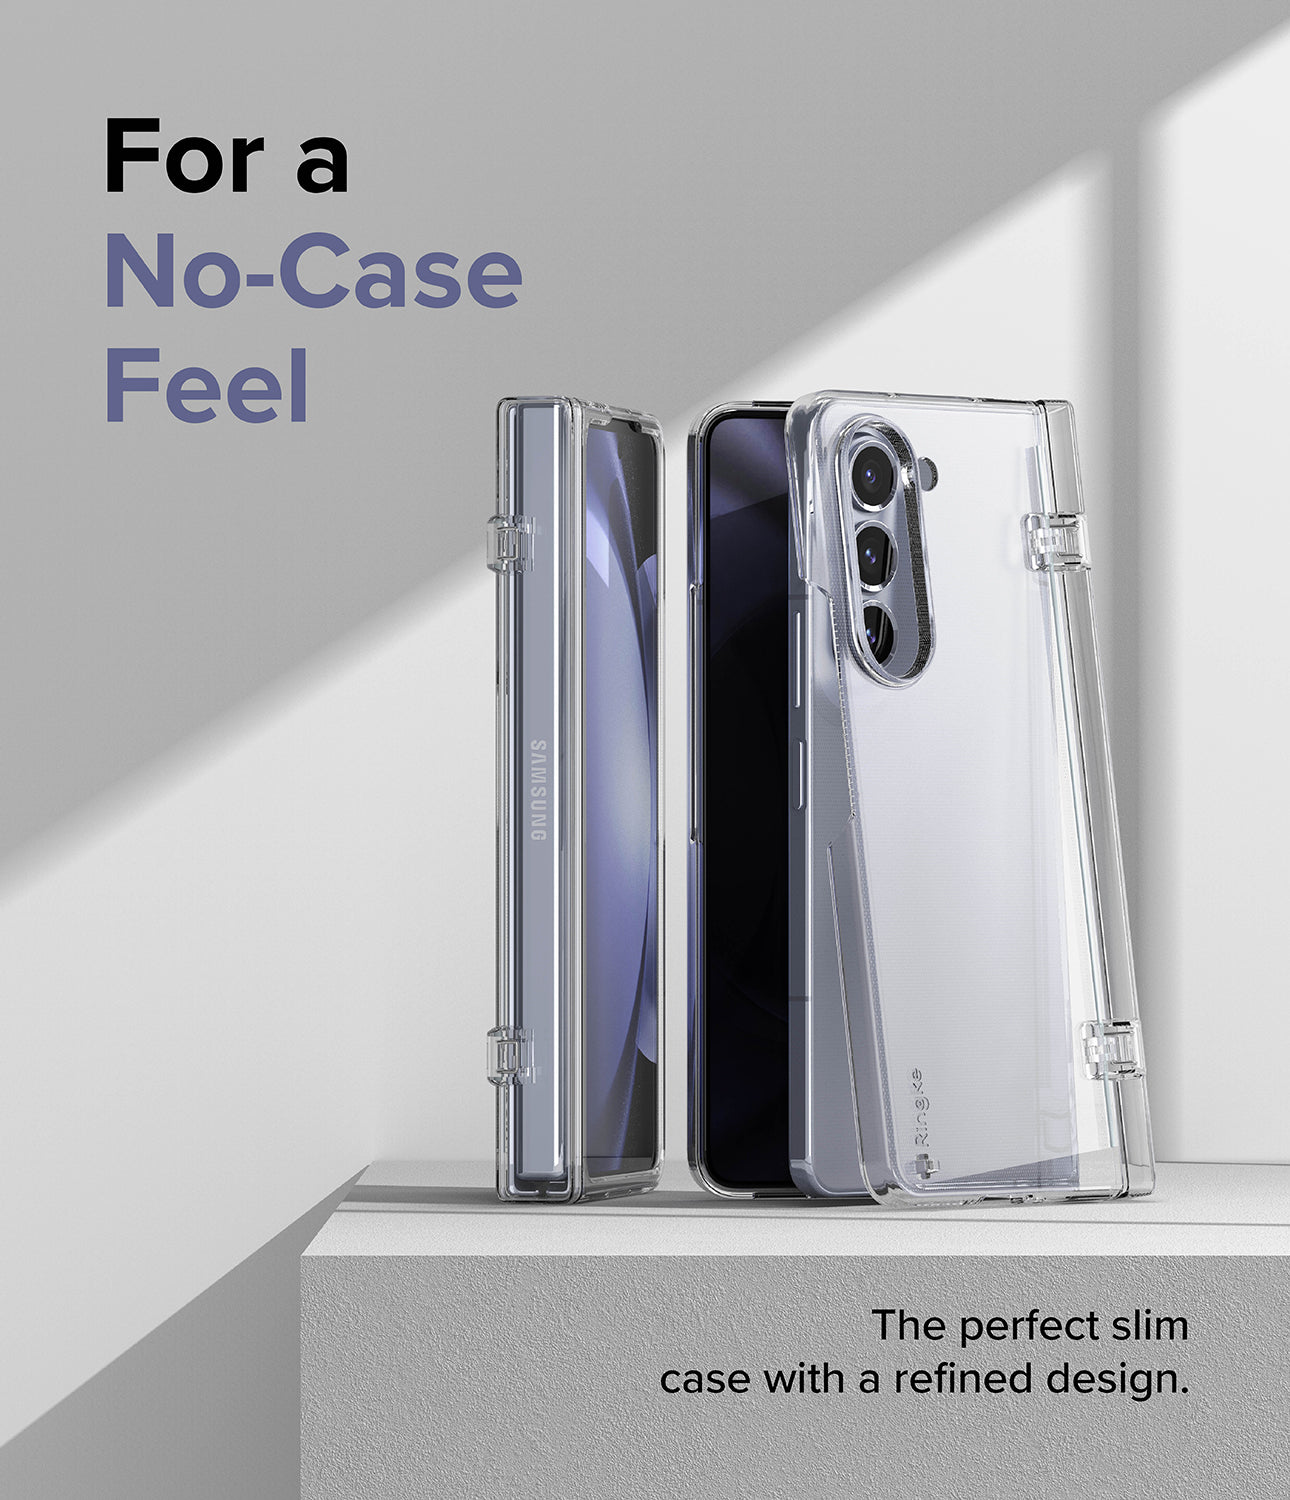 Galaxy Z Fold 5 Case | Slim Hinge - For a No-Case Feel. The perfect slim case with a refined design.